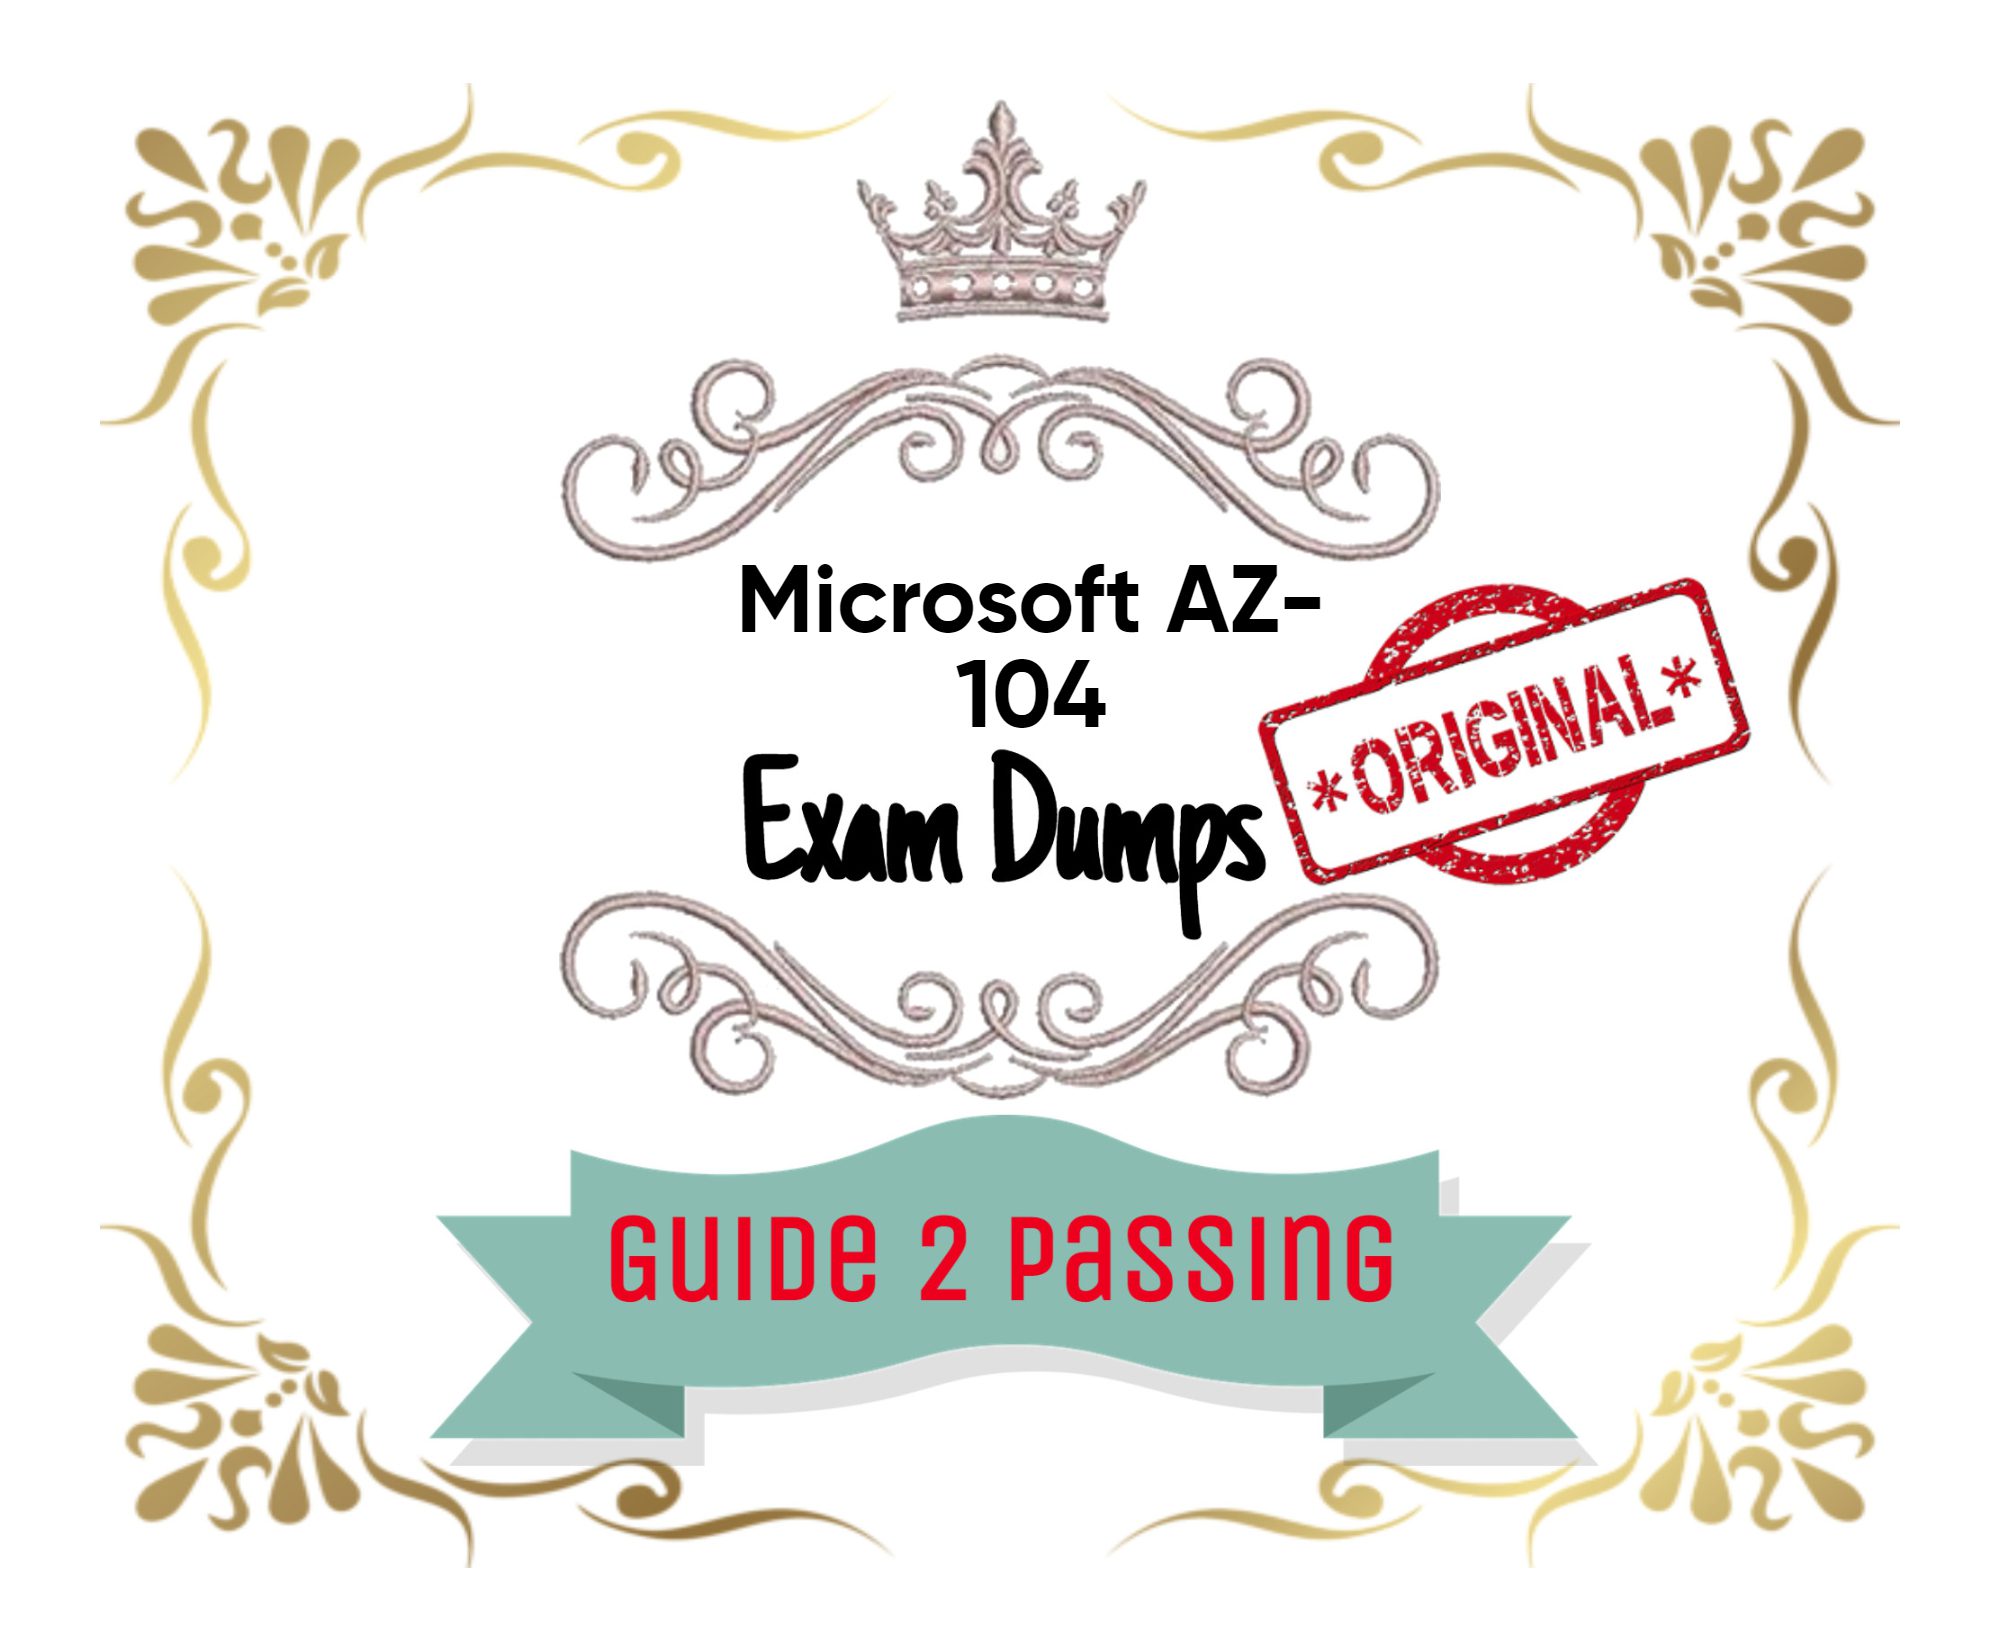 Pass Your Microsoft AZ-104 Exam Dumps From Guide 2 Passing